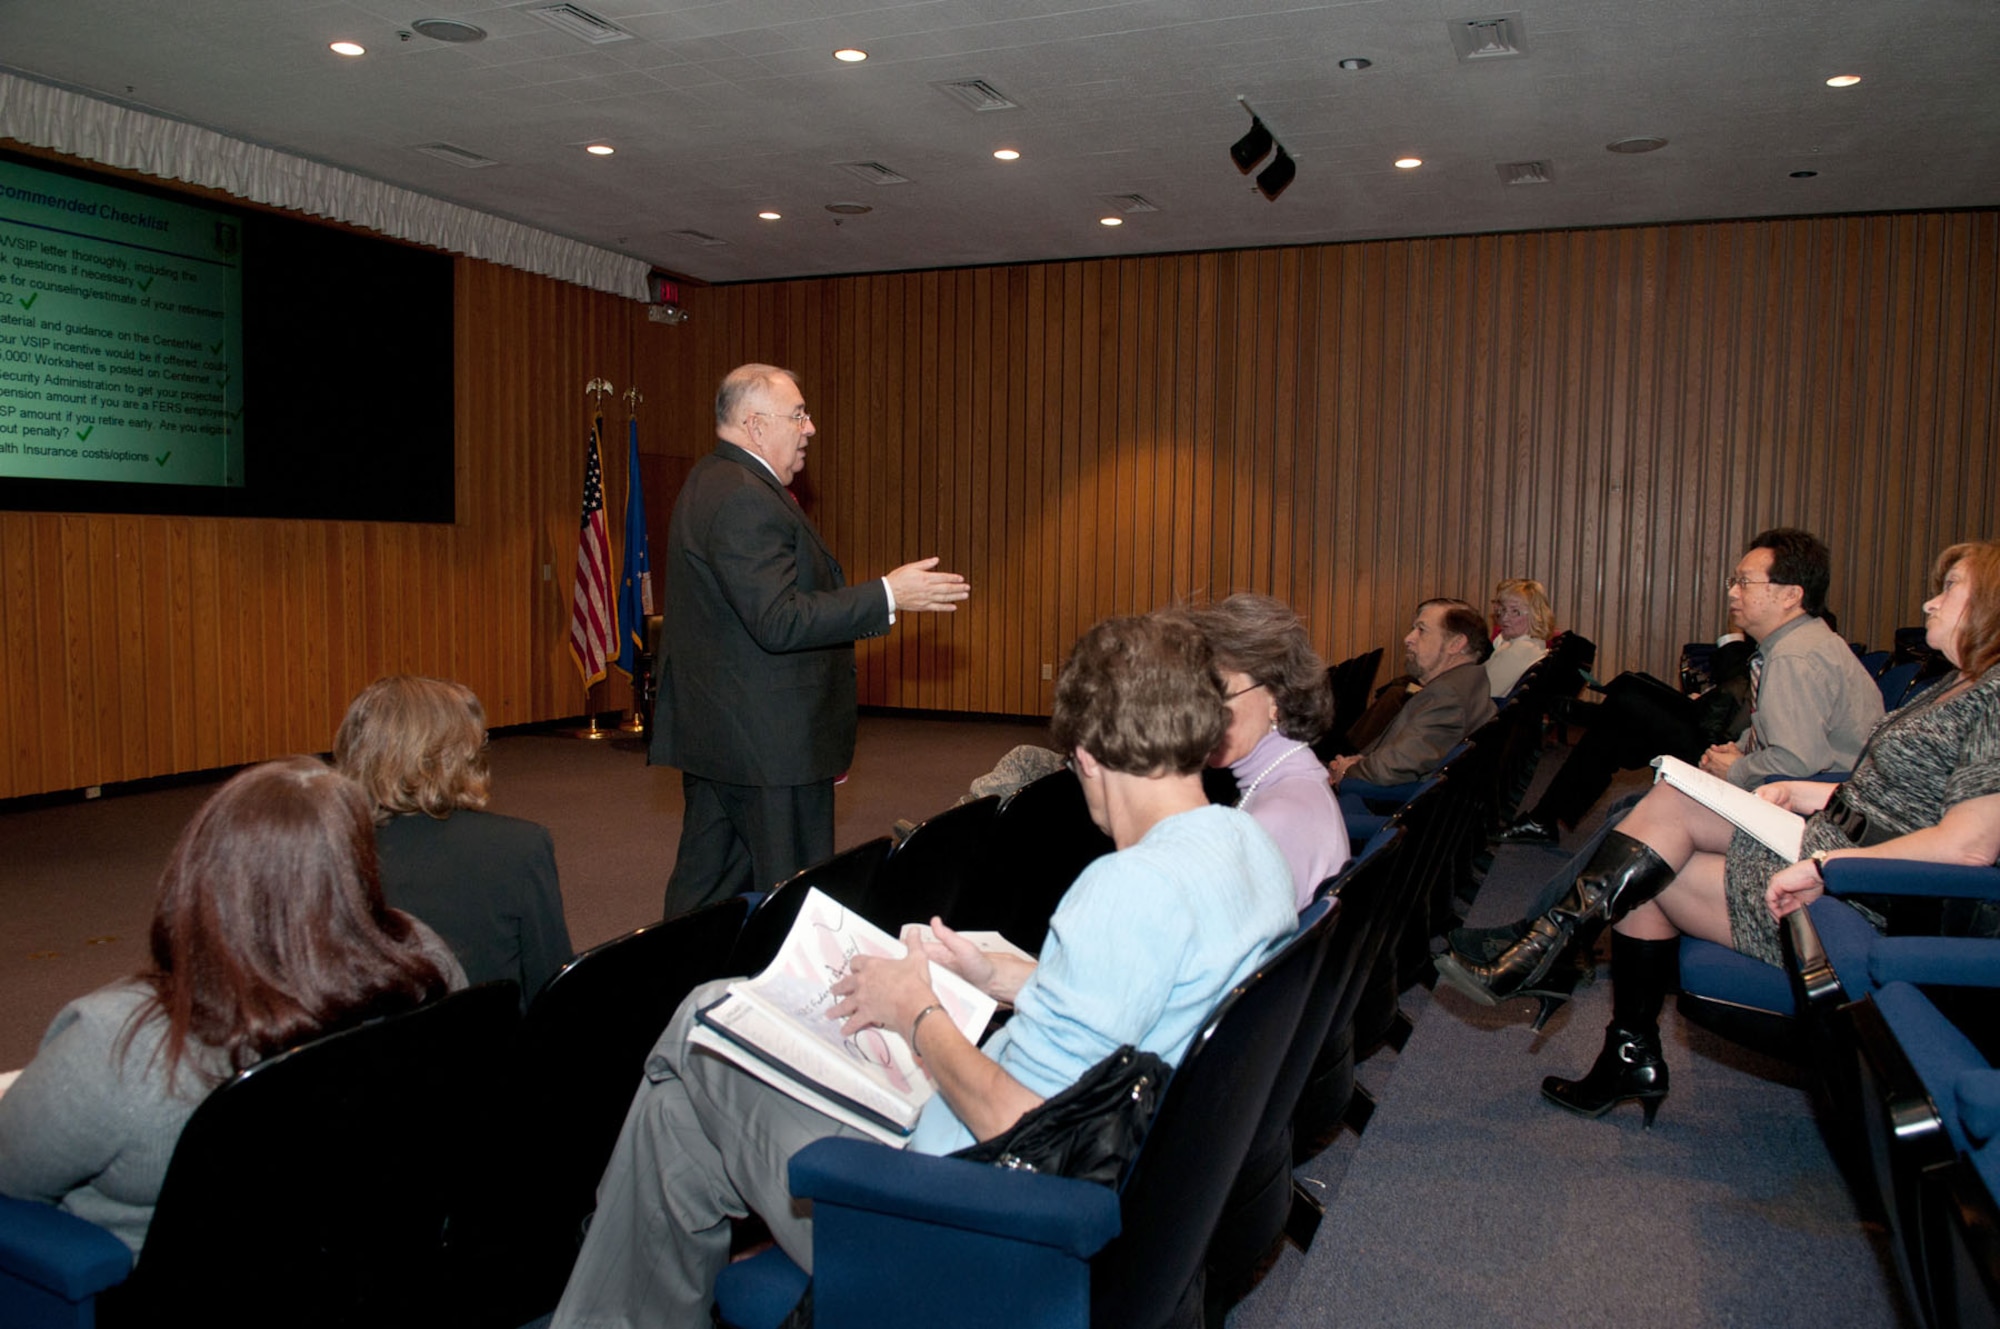 HANSCOM AIR FORCE BASE, Mass. – Luis Hernandez, Manpower and Personnel Directorate deputy director, speaks to attendees during a voluntary early retirement authority and voluntary separation incentive pay town hall meeting in the O’Neill Auditorium Jan. 11. The town hall was held to answer questions about the VERA/VSIP process. Earlier this week, Hanscom employees received VERA/VSIP letters and anyone interested in applying must do so by Jan. 20. (U.S. Air Force photo by Rick Berry)